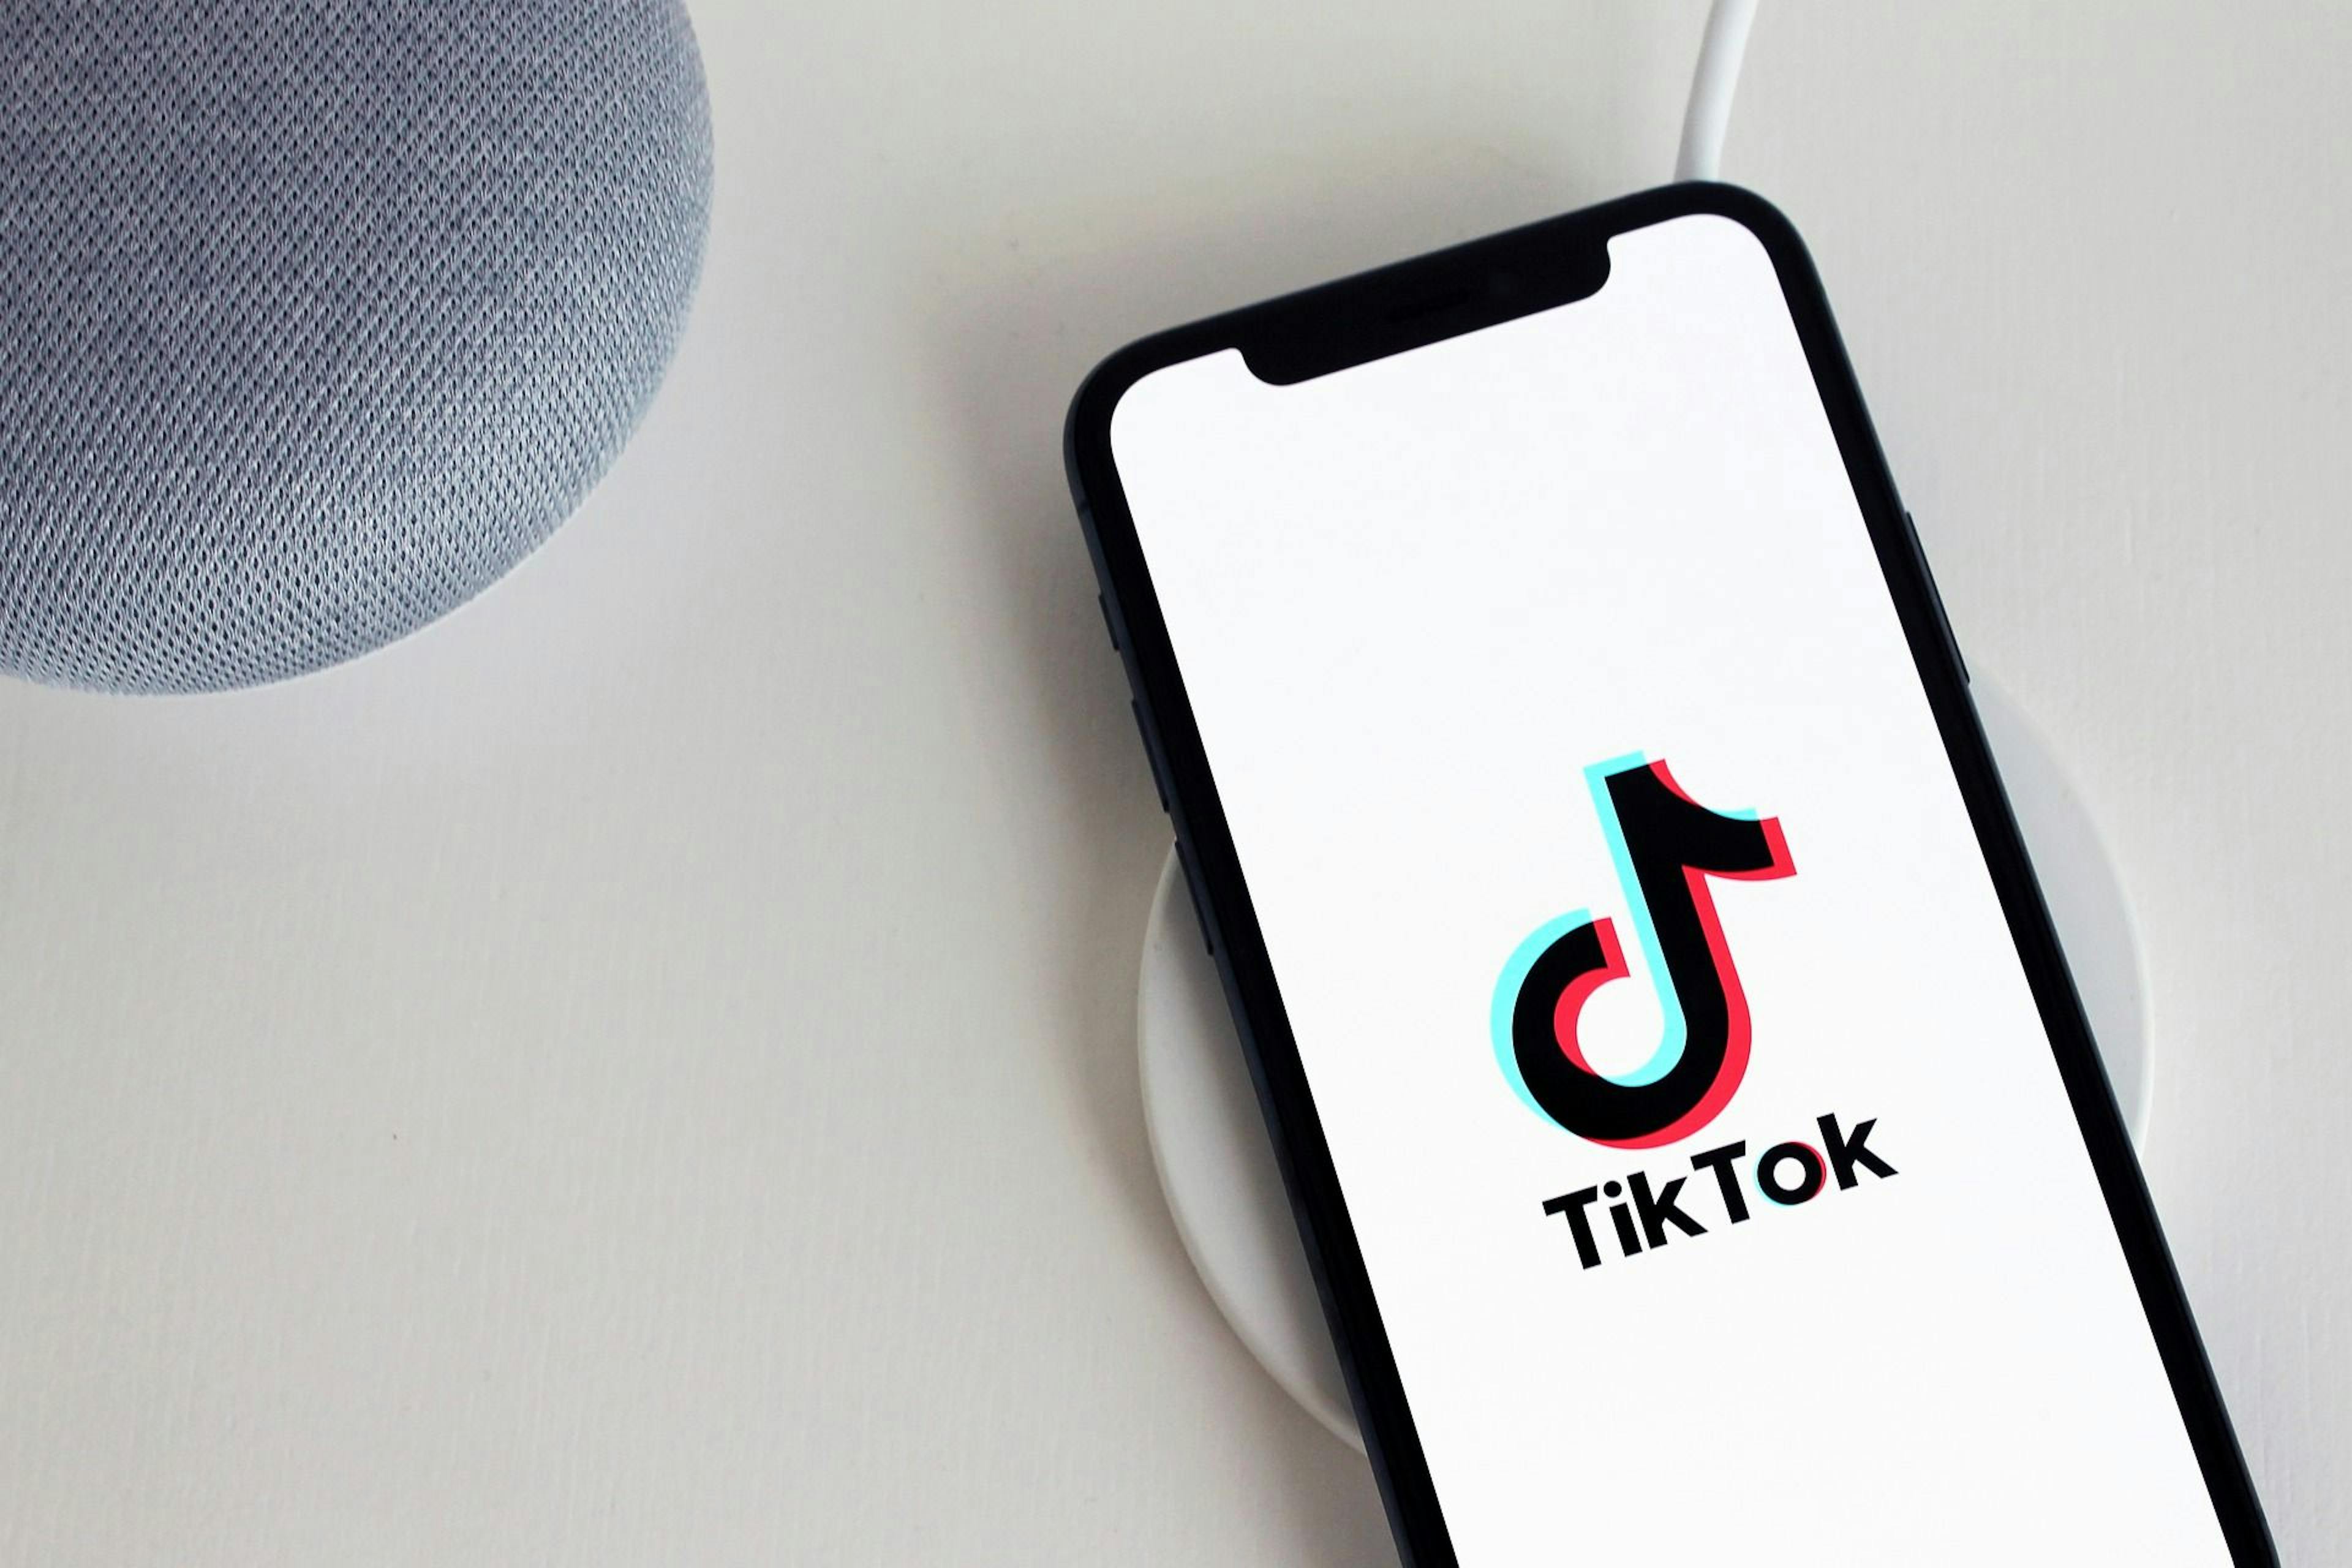 /how-to-hack-tiktok-accounts-5-common-vulnerabilities-3a8337k2 feature image